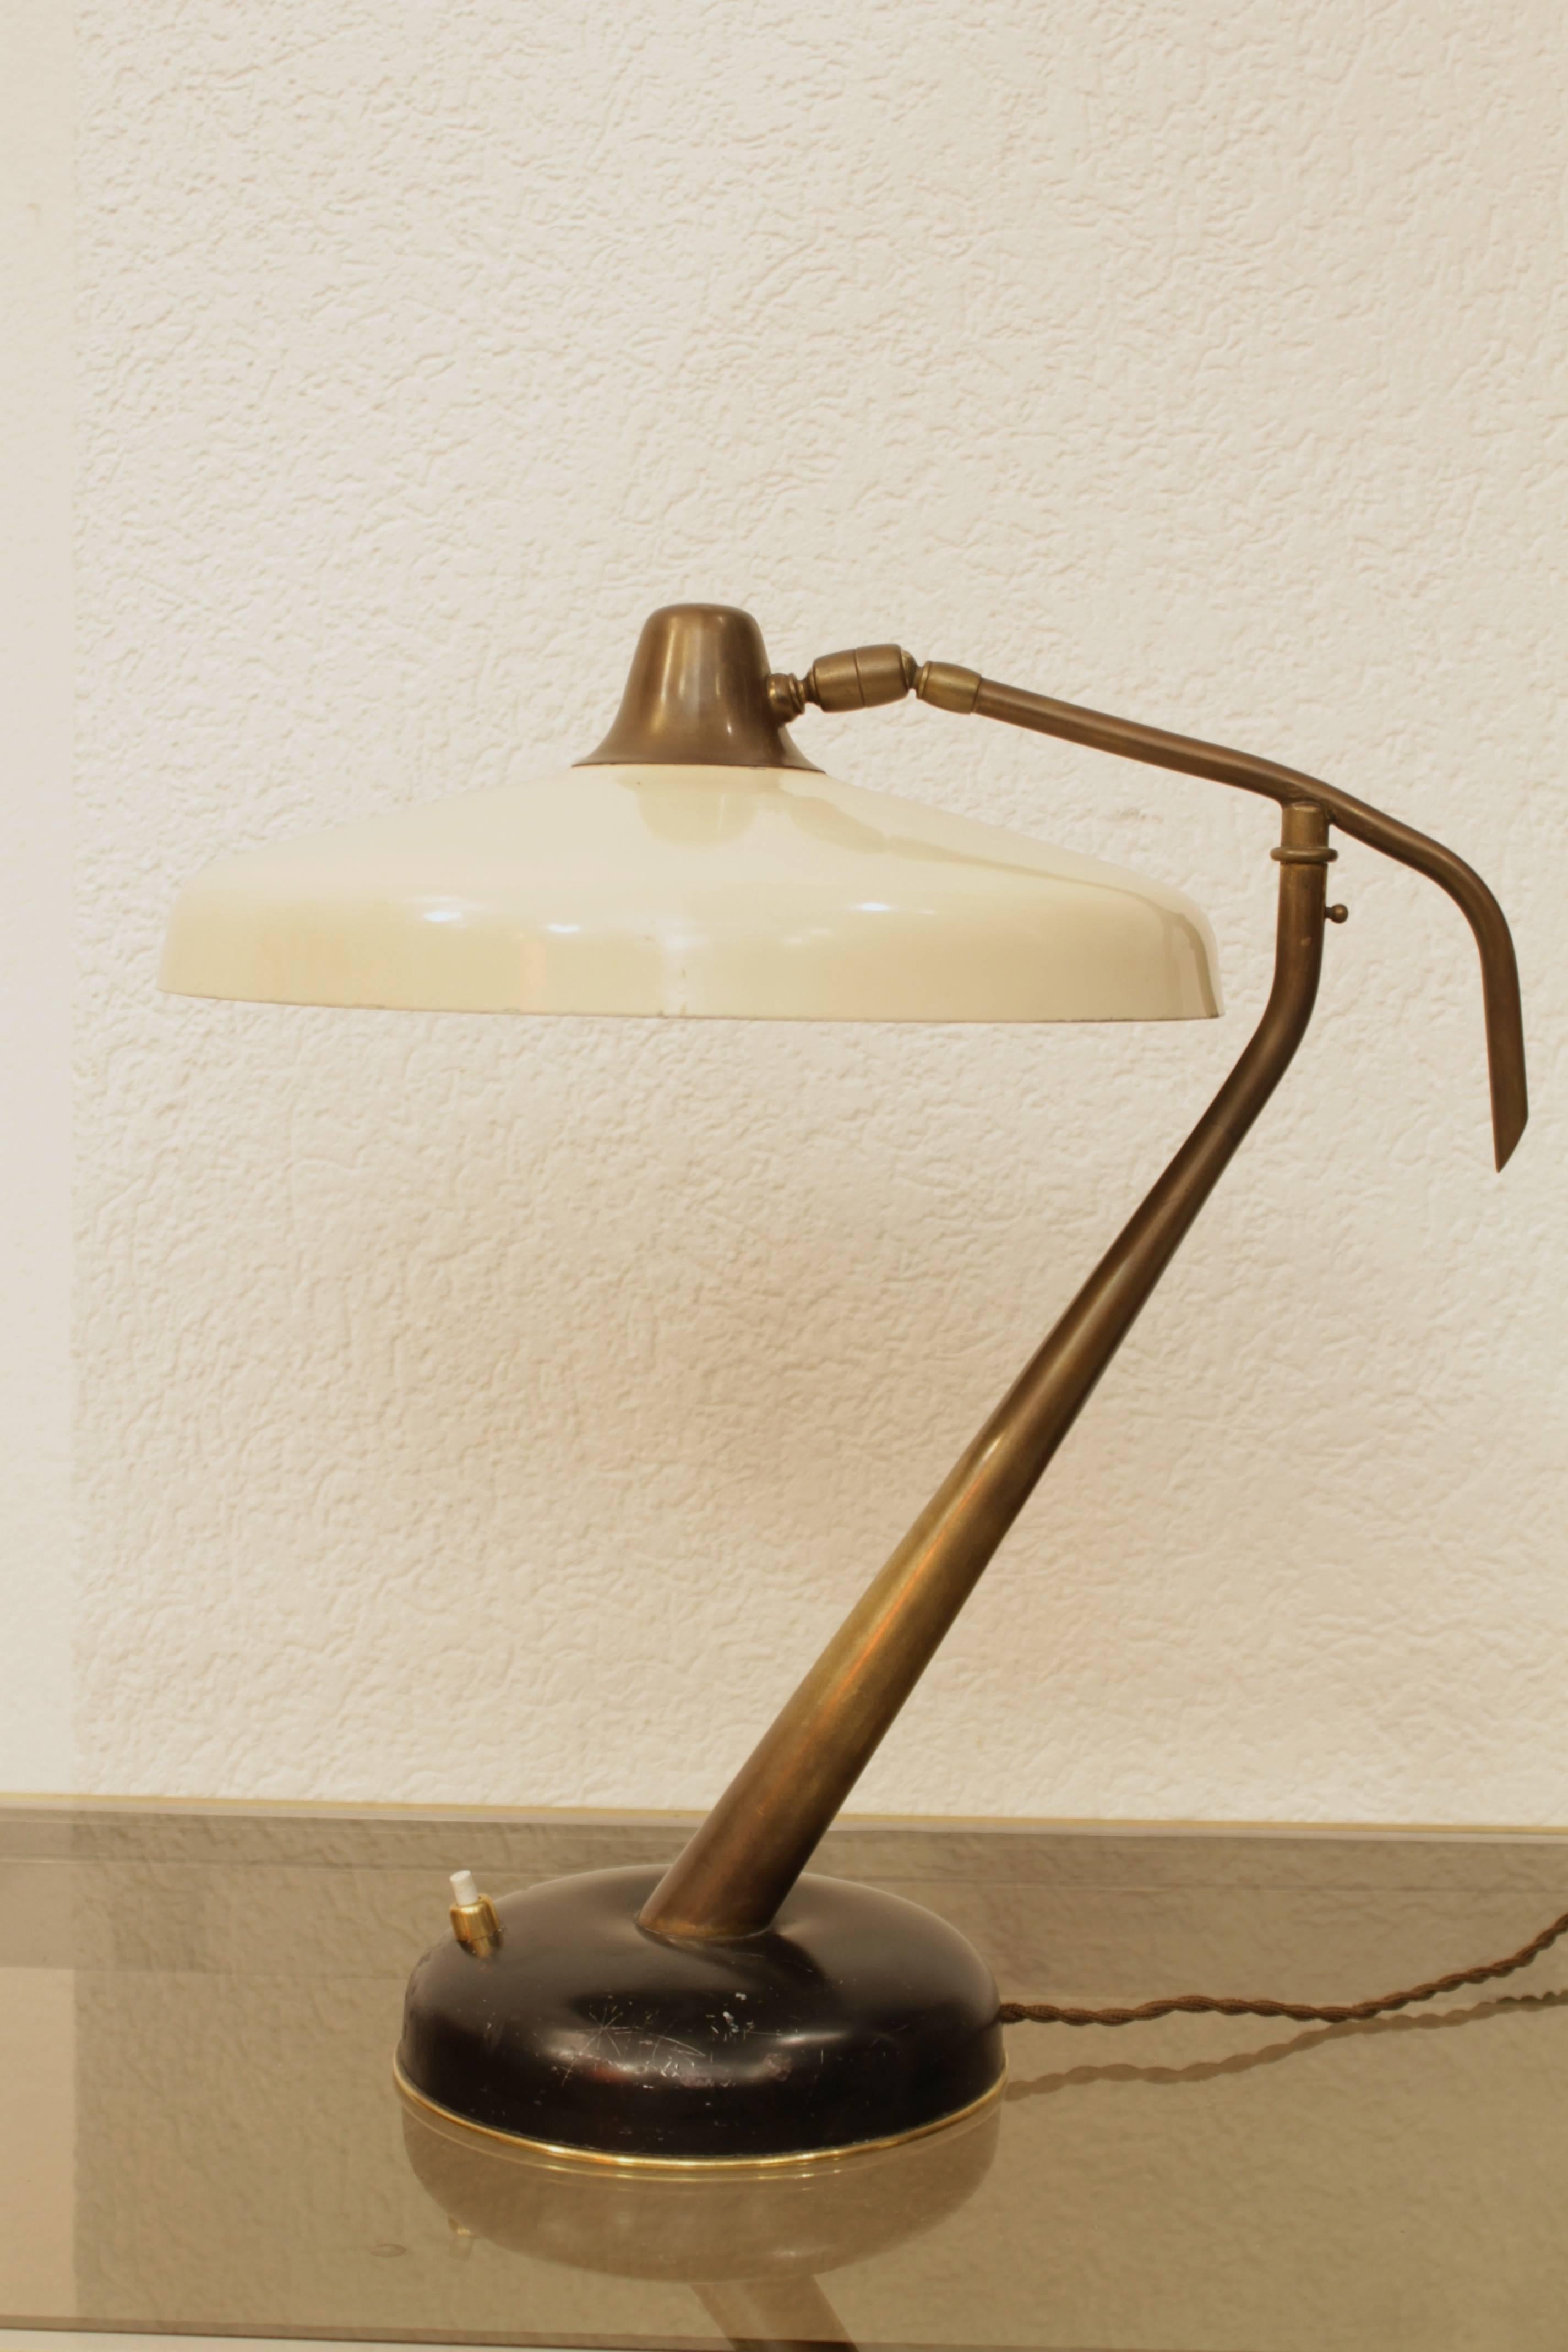 Rare brass and off white metal table or desk lamp by Oscar Torlasco for Lumi, Italy, circa 1950s
Original condition, unrestored, patinated brass
Multiple position, swivelling
Bump on the metal base.
   